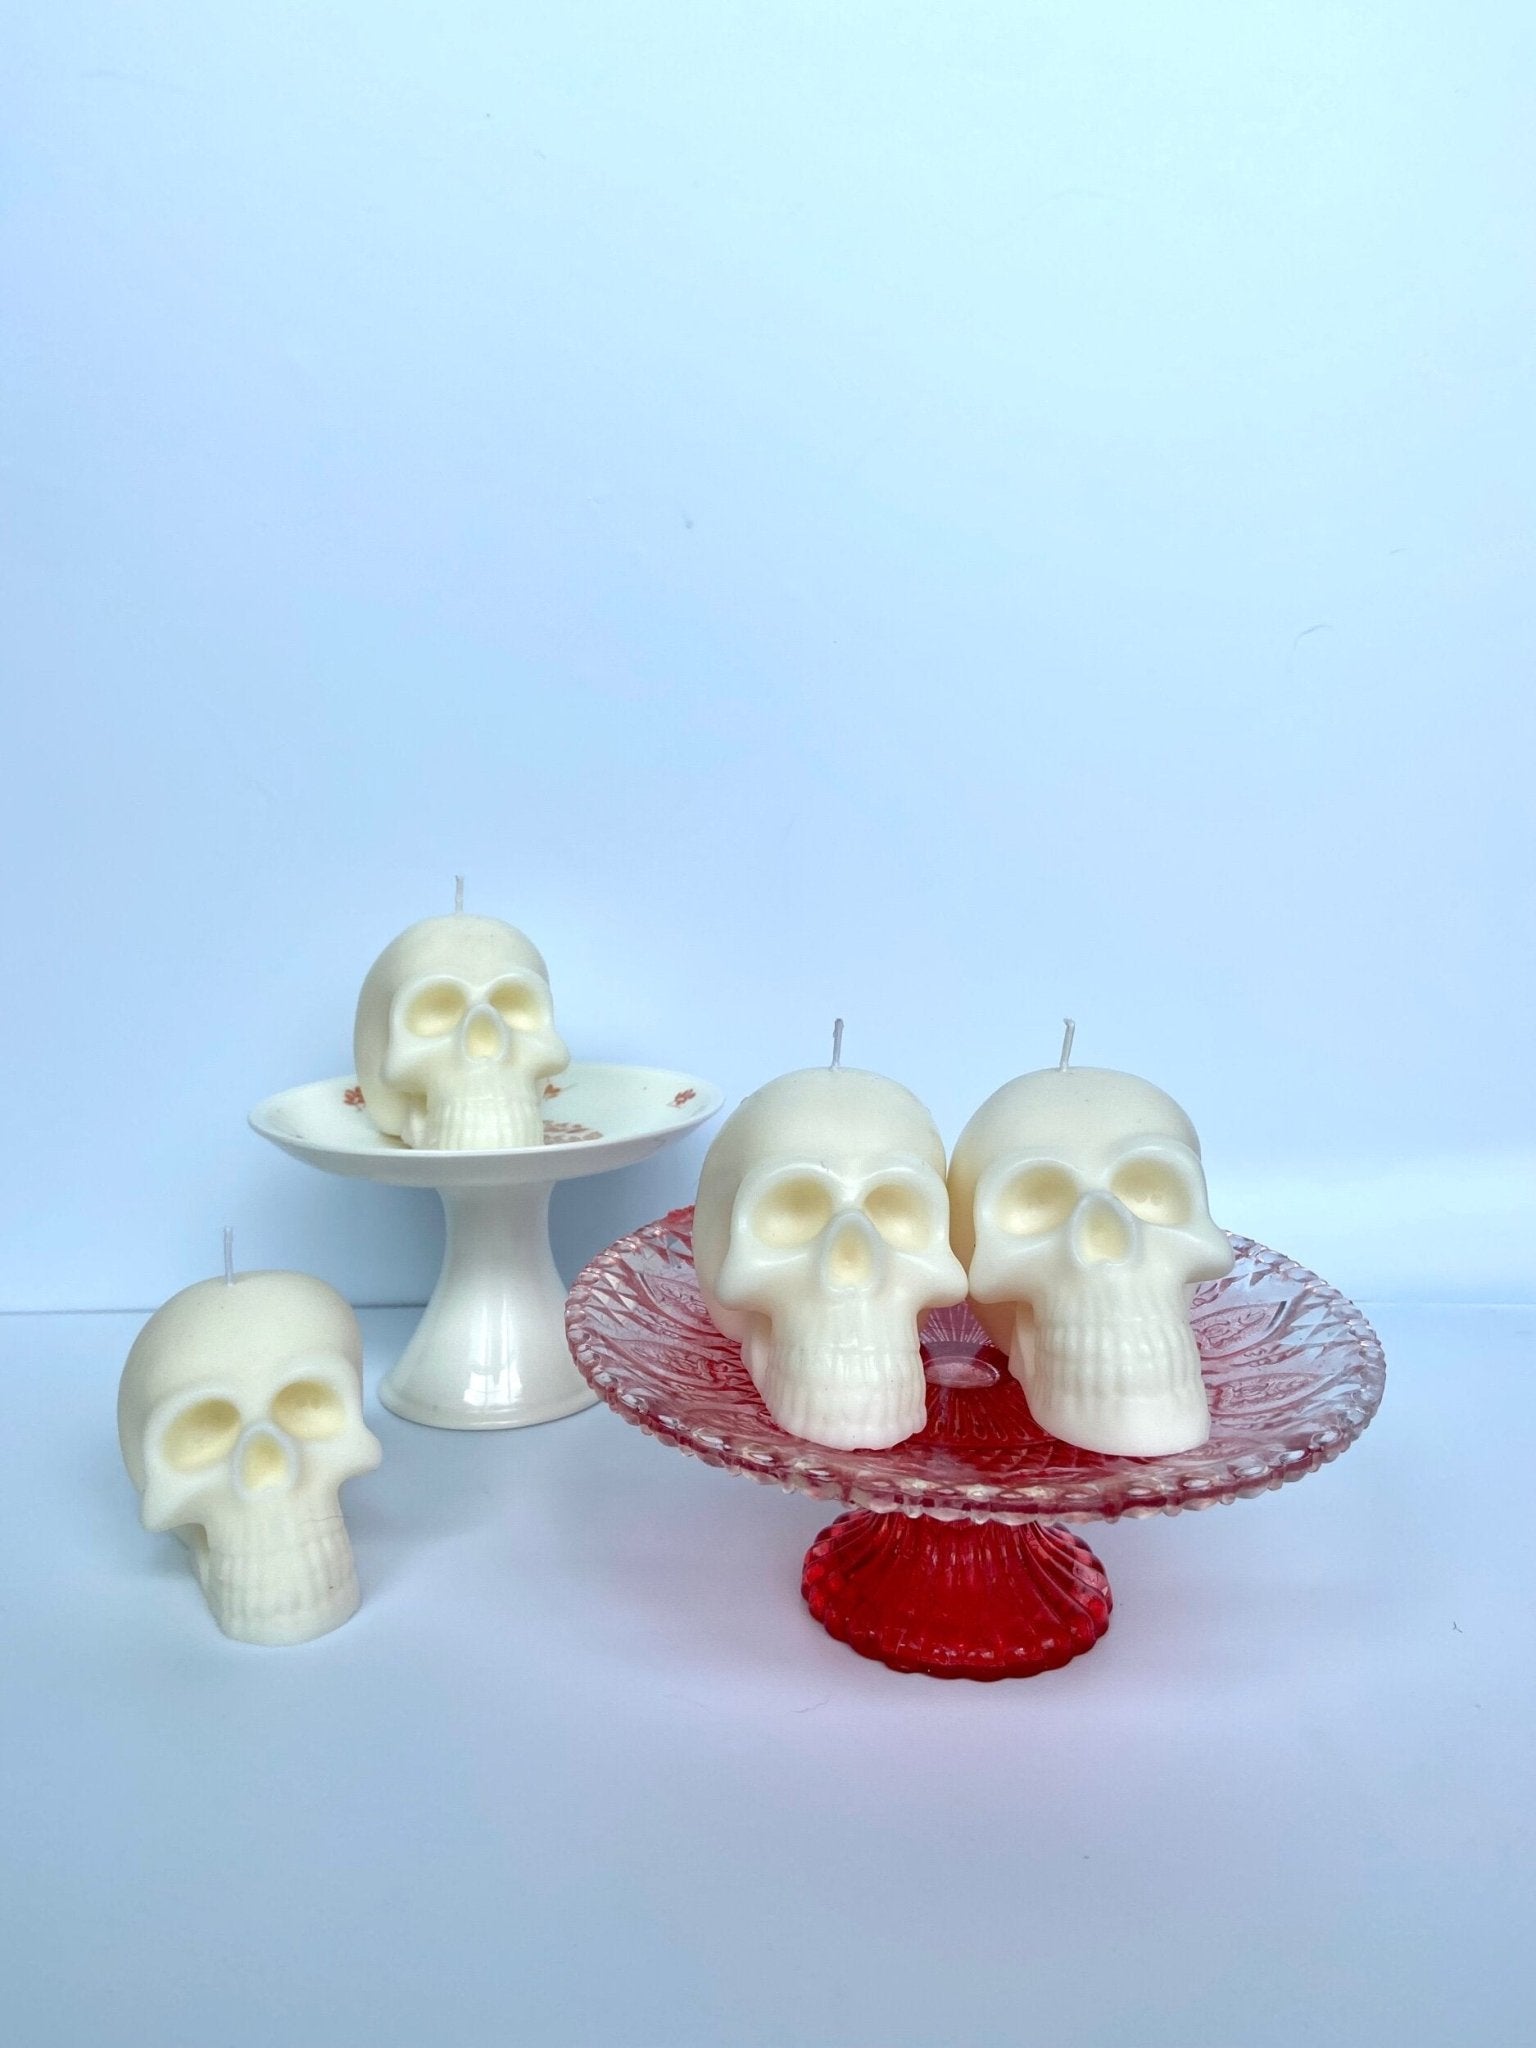 Skull Candle - Kendall's Kandles